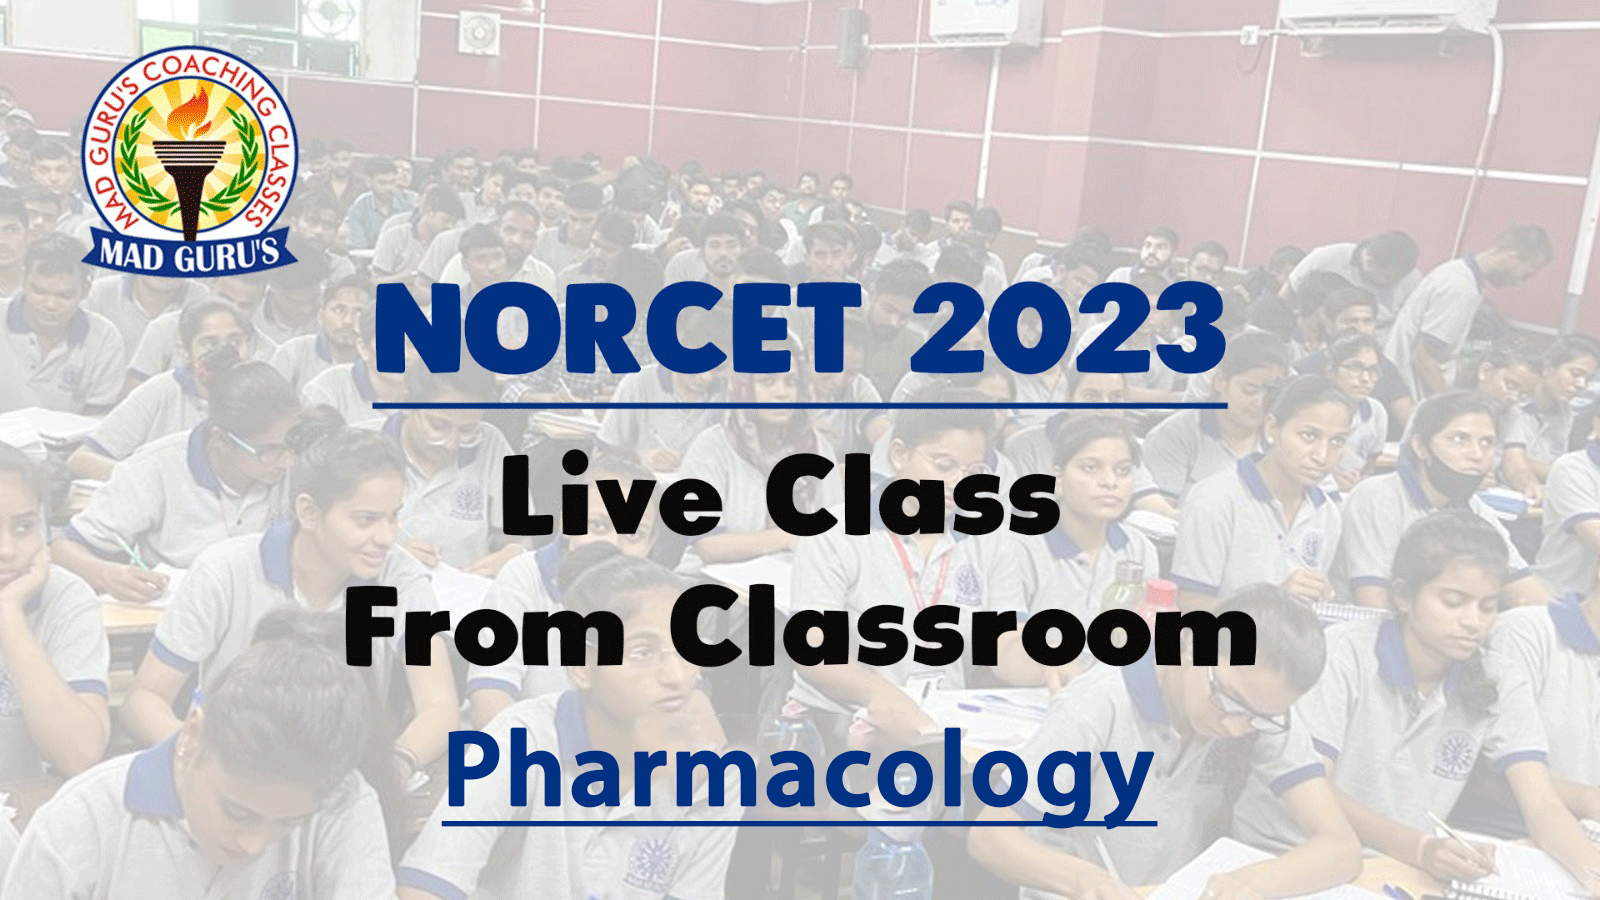 Pharmacology || Norcet classes from Classroom